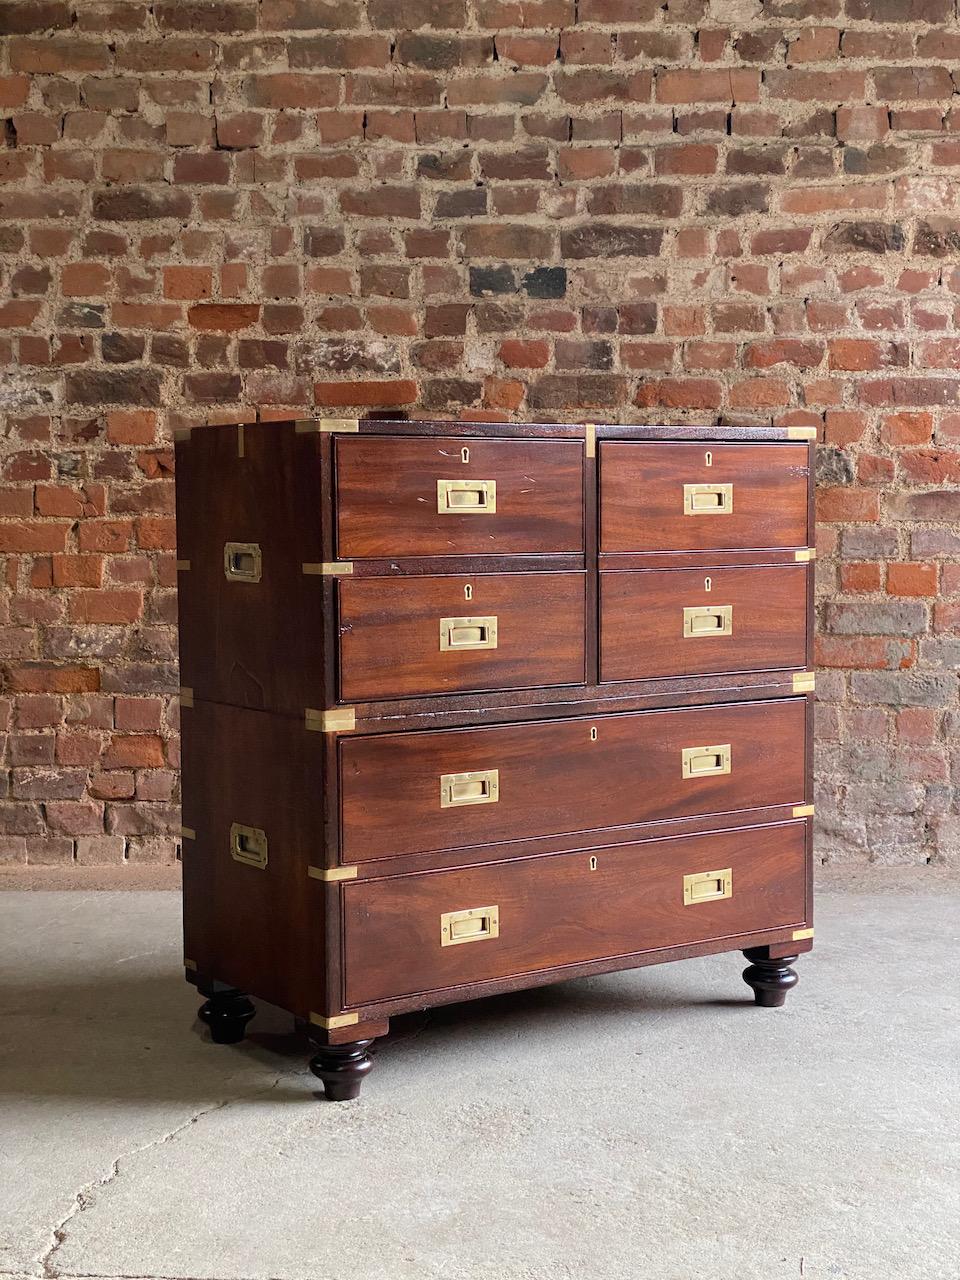 19th century military campaign chest of drawers teak circa 1850 number 88

Fabulous 19th century Colonial Military brass - Mounted Teak Campaign chest of drawers, England circa 1850, the two section chest with original flush mounted brass handles